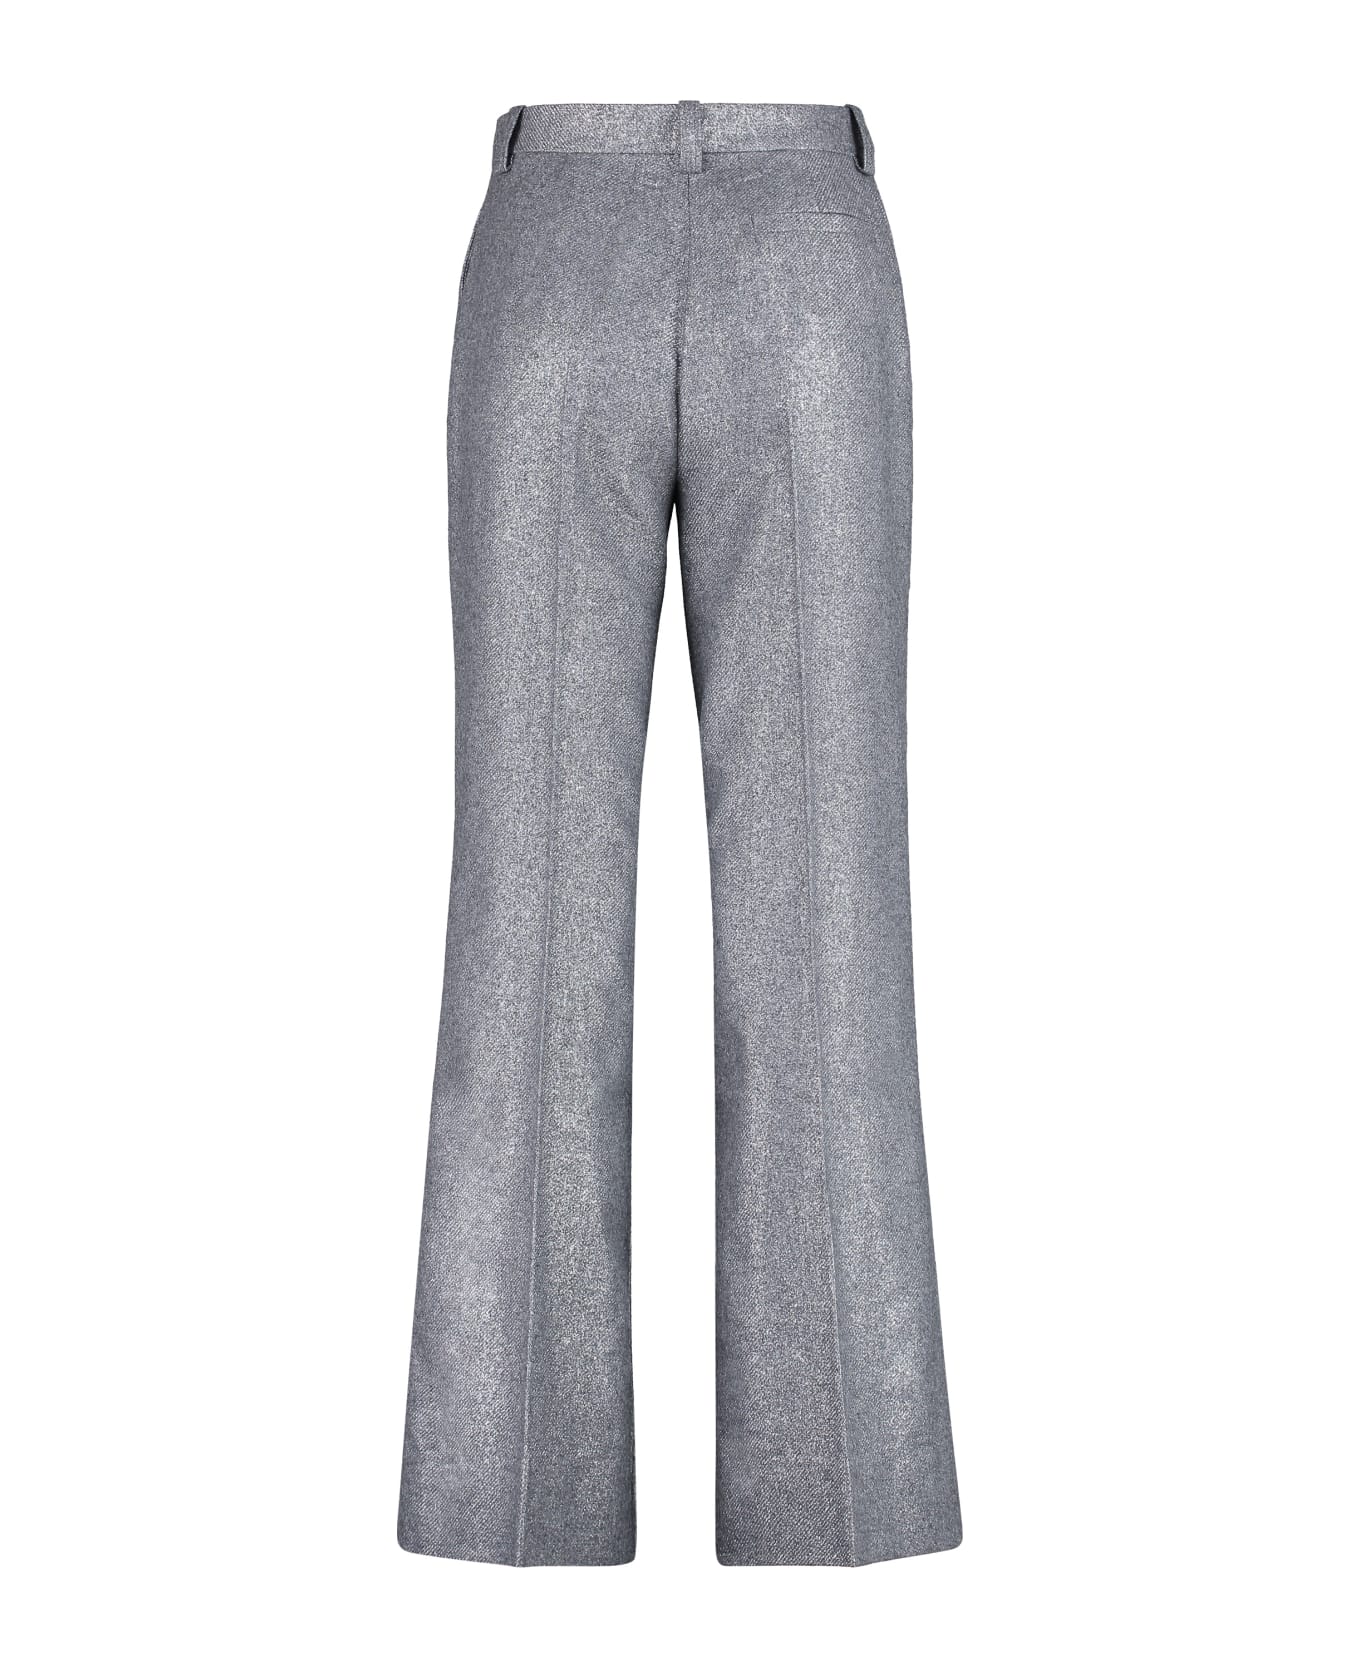 Rodebjer Emma Flared-leg Tailored Trousers - Silver